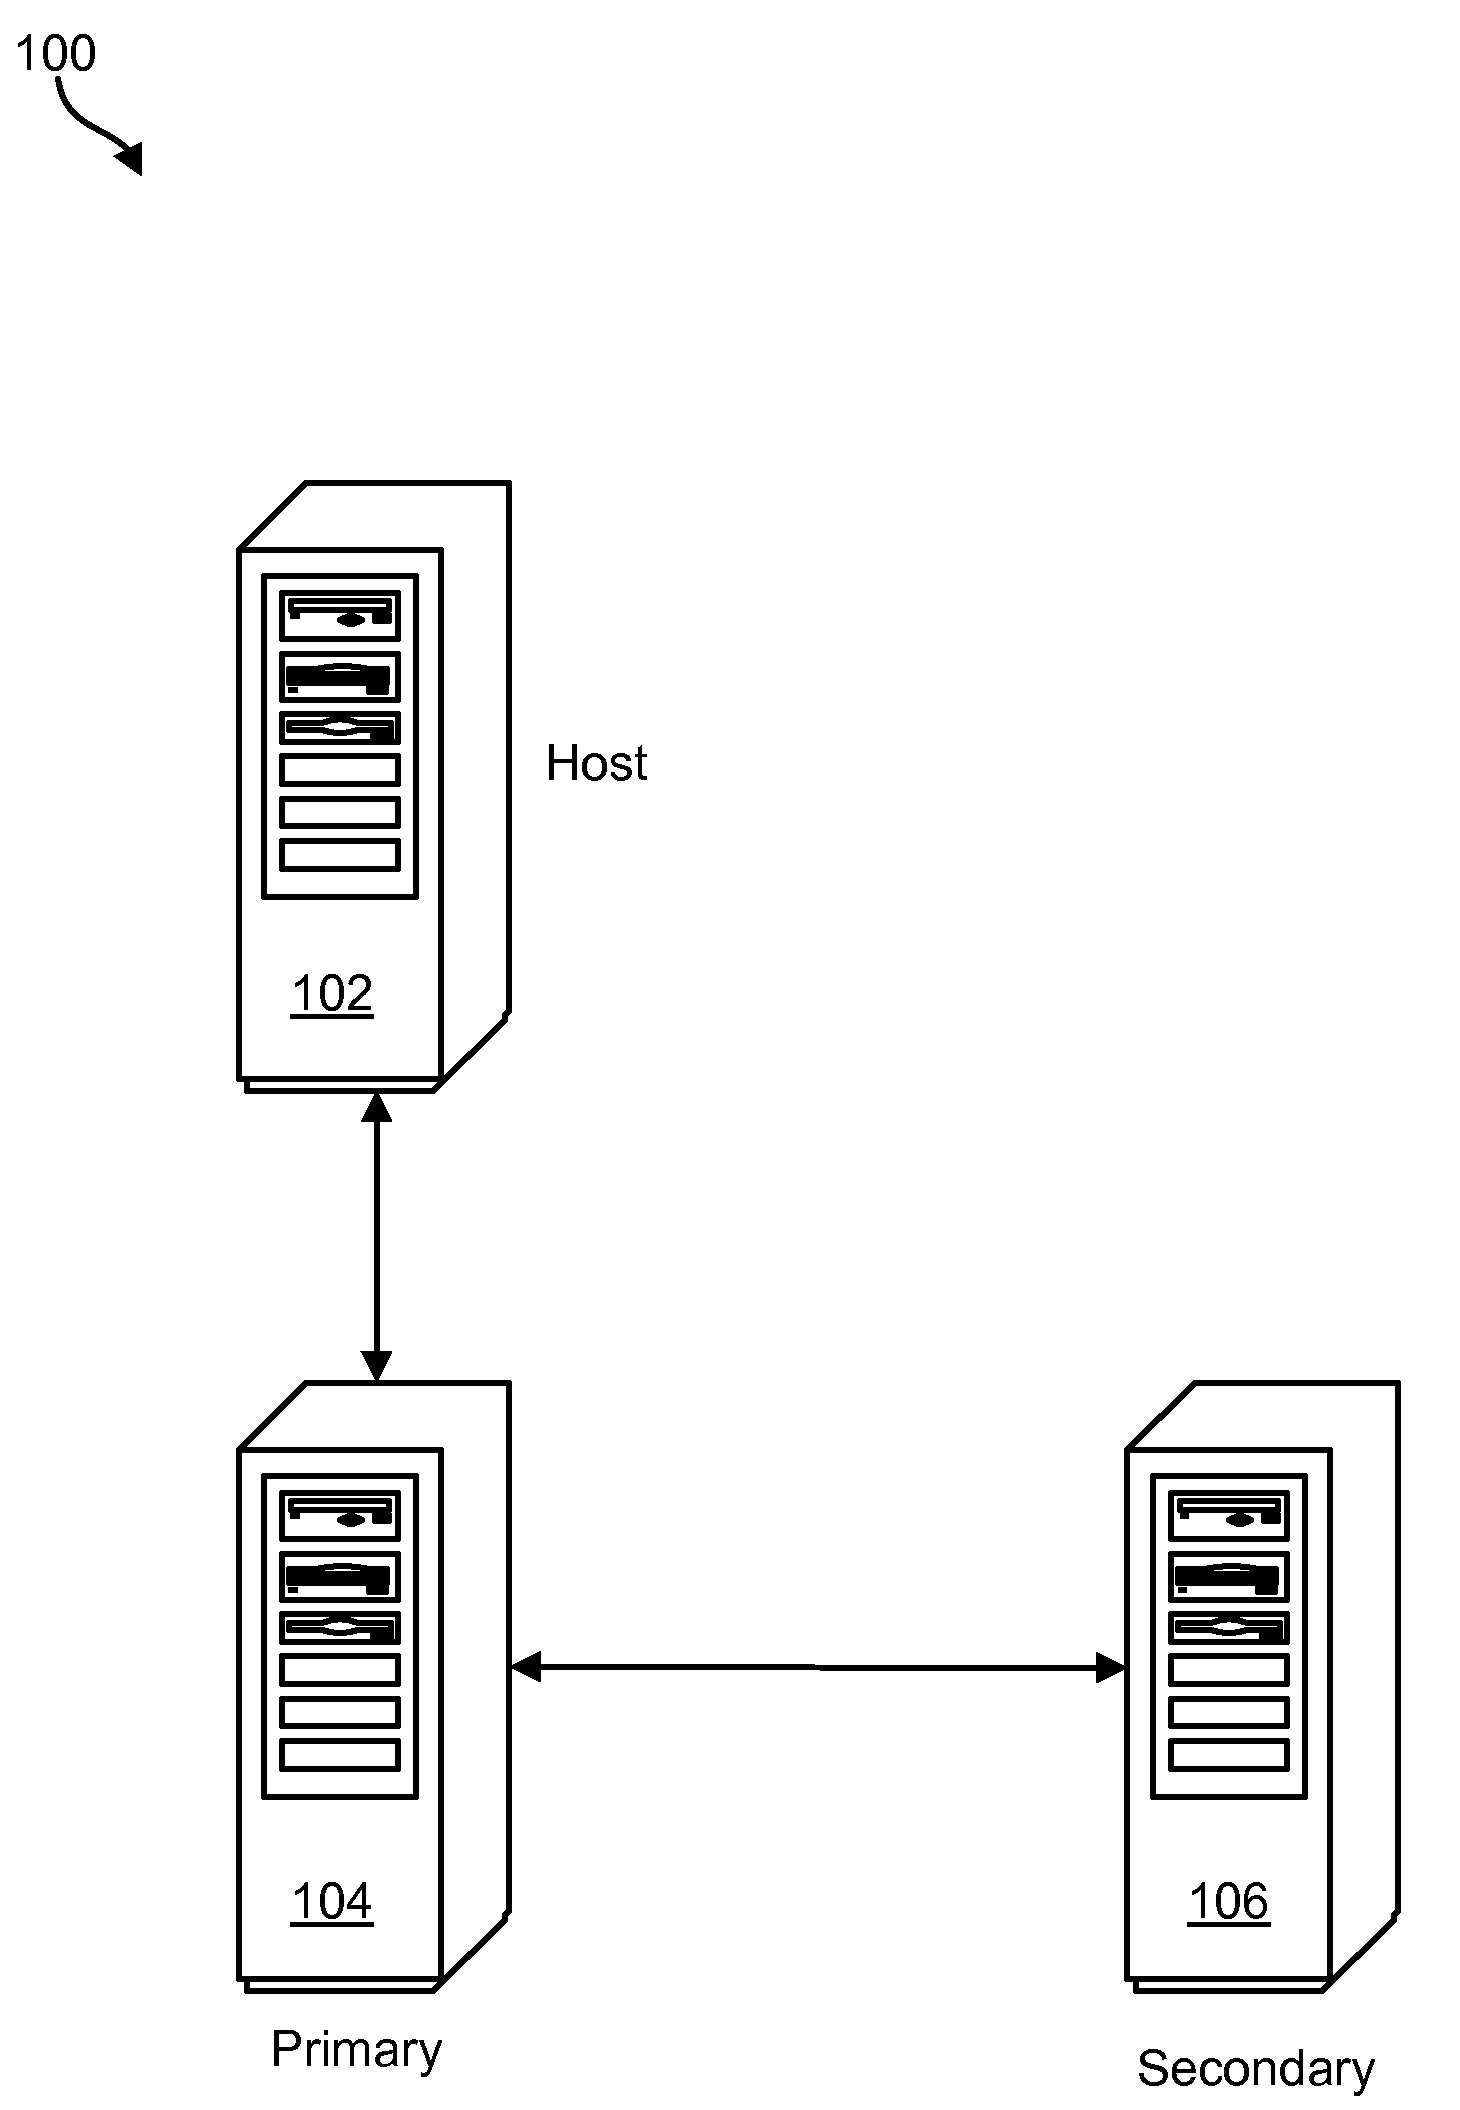 Command sequence numbering apparatus and method